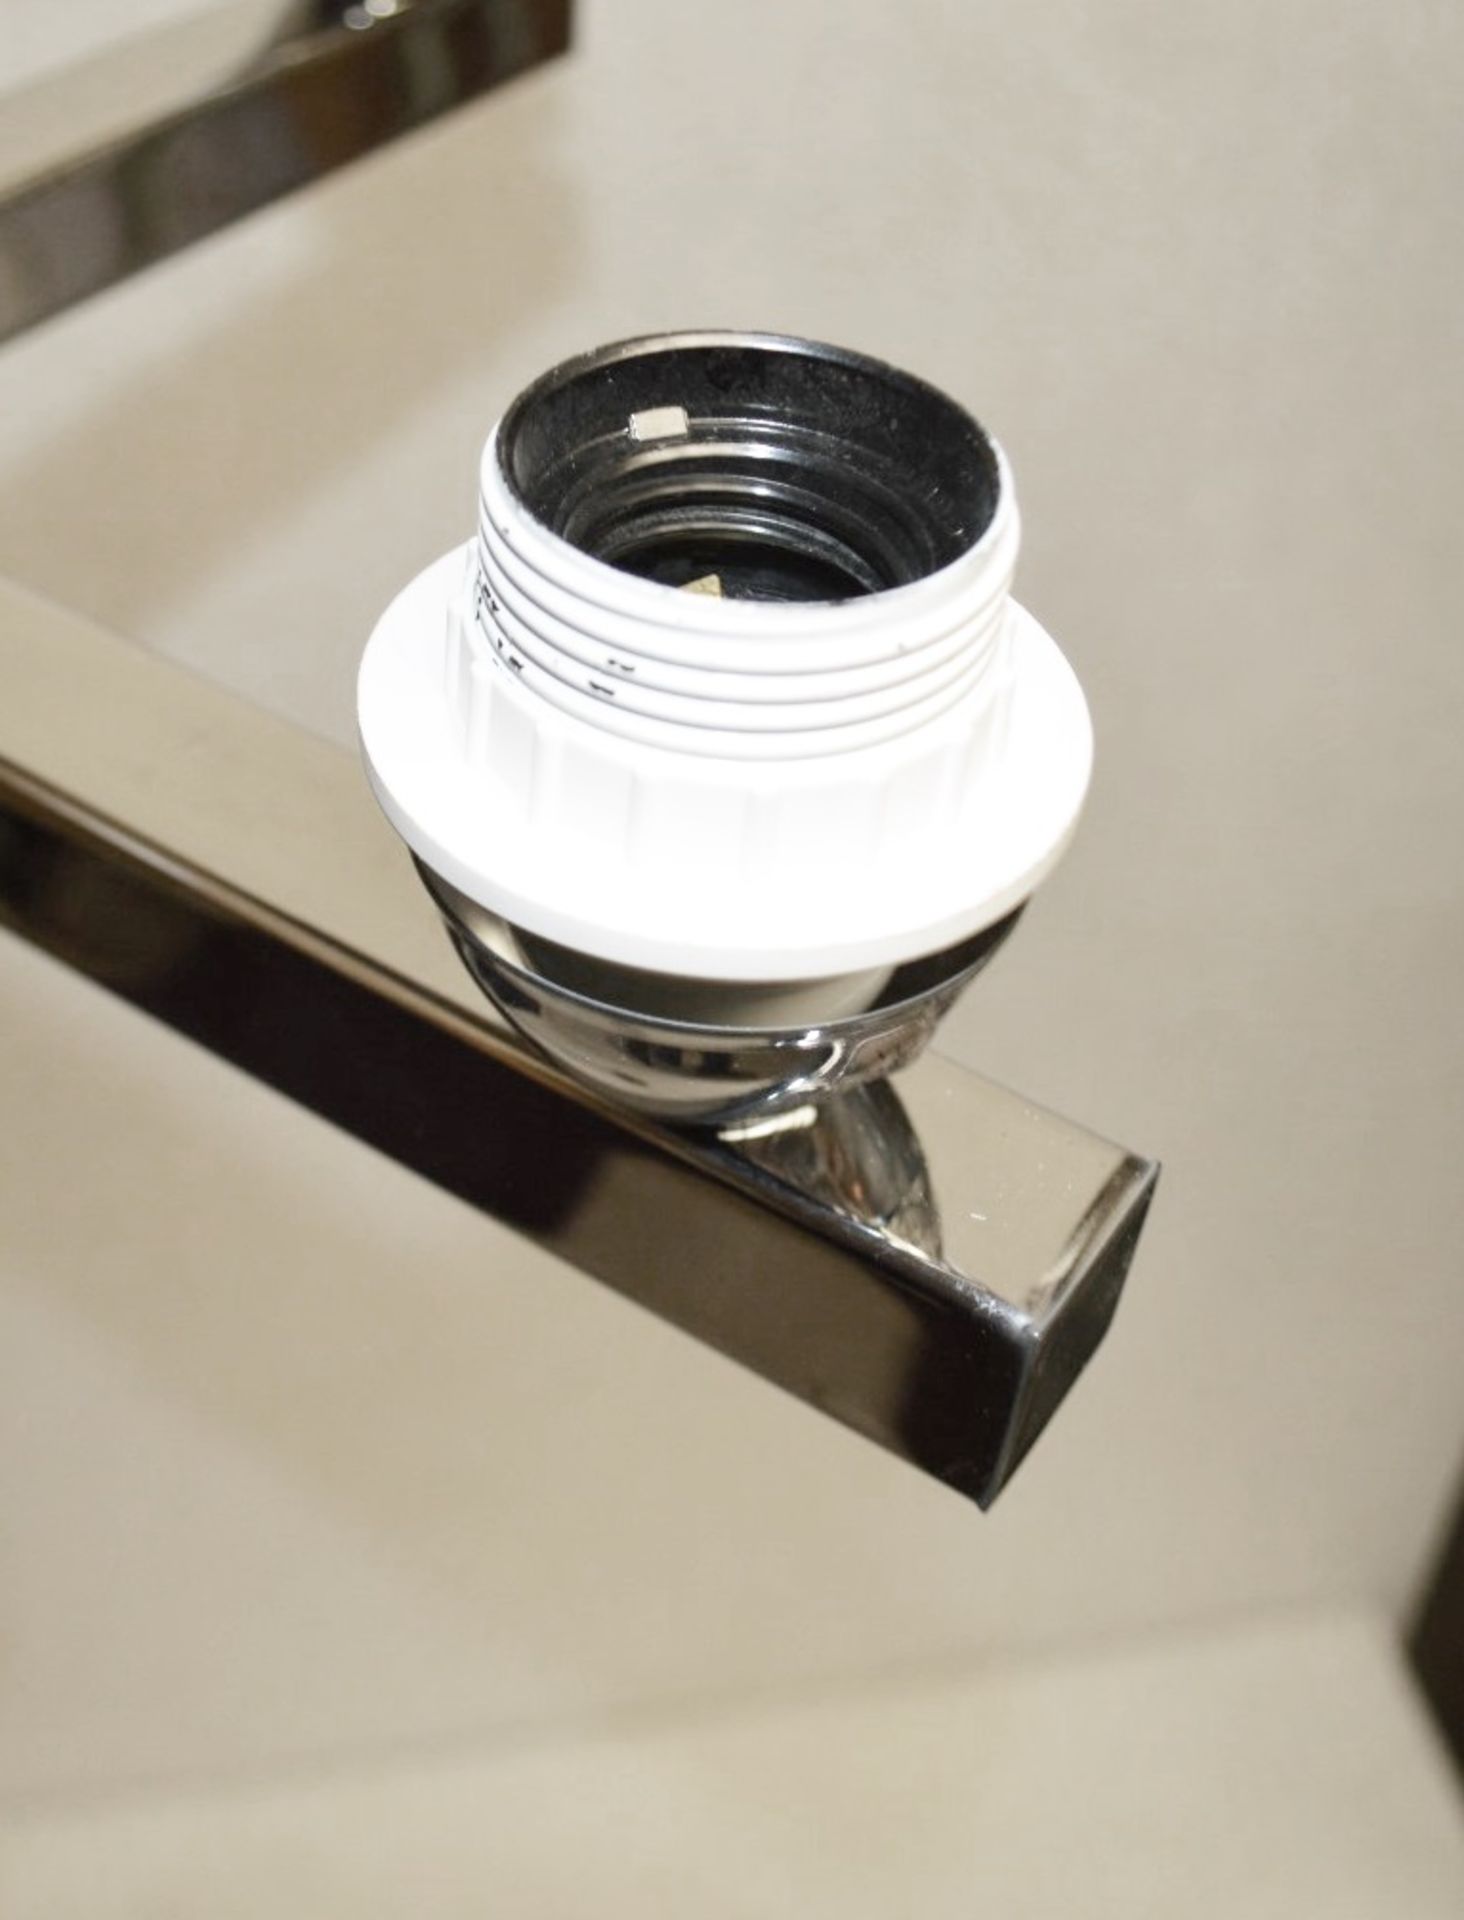 1 x CHELSOM 4-Arm 1-Metre Tall Ceiling Light Fitting In A Chrome Finish - Unused Stock - Dimensions: - Image 4 of 7